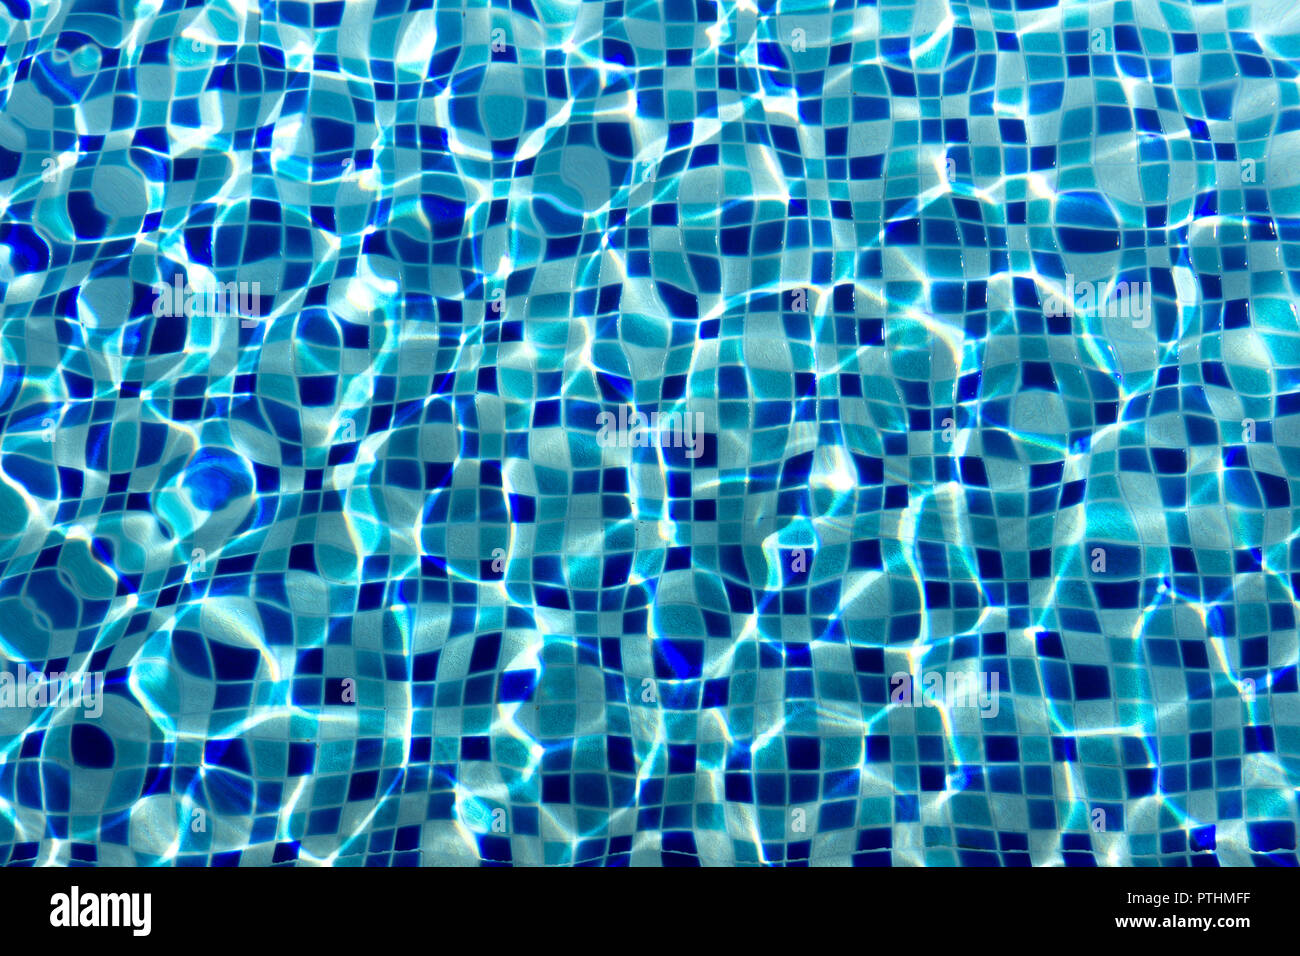 Ripple and flow with waves swimming pool bottom background. Stock Photo